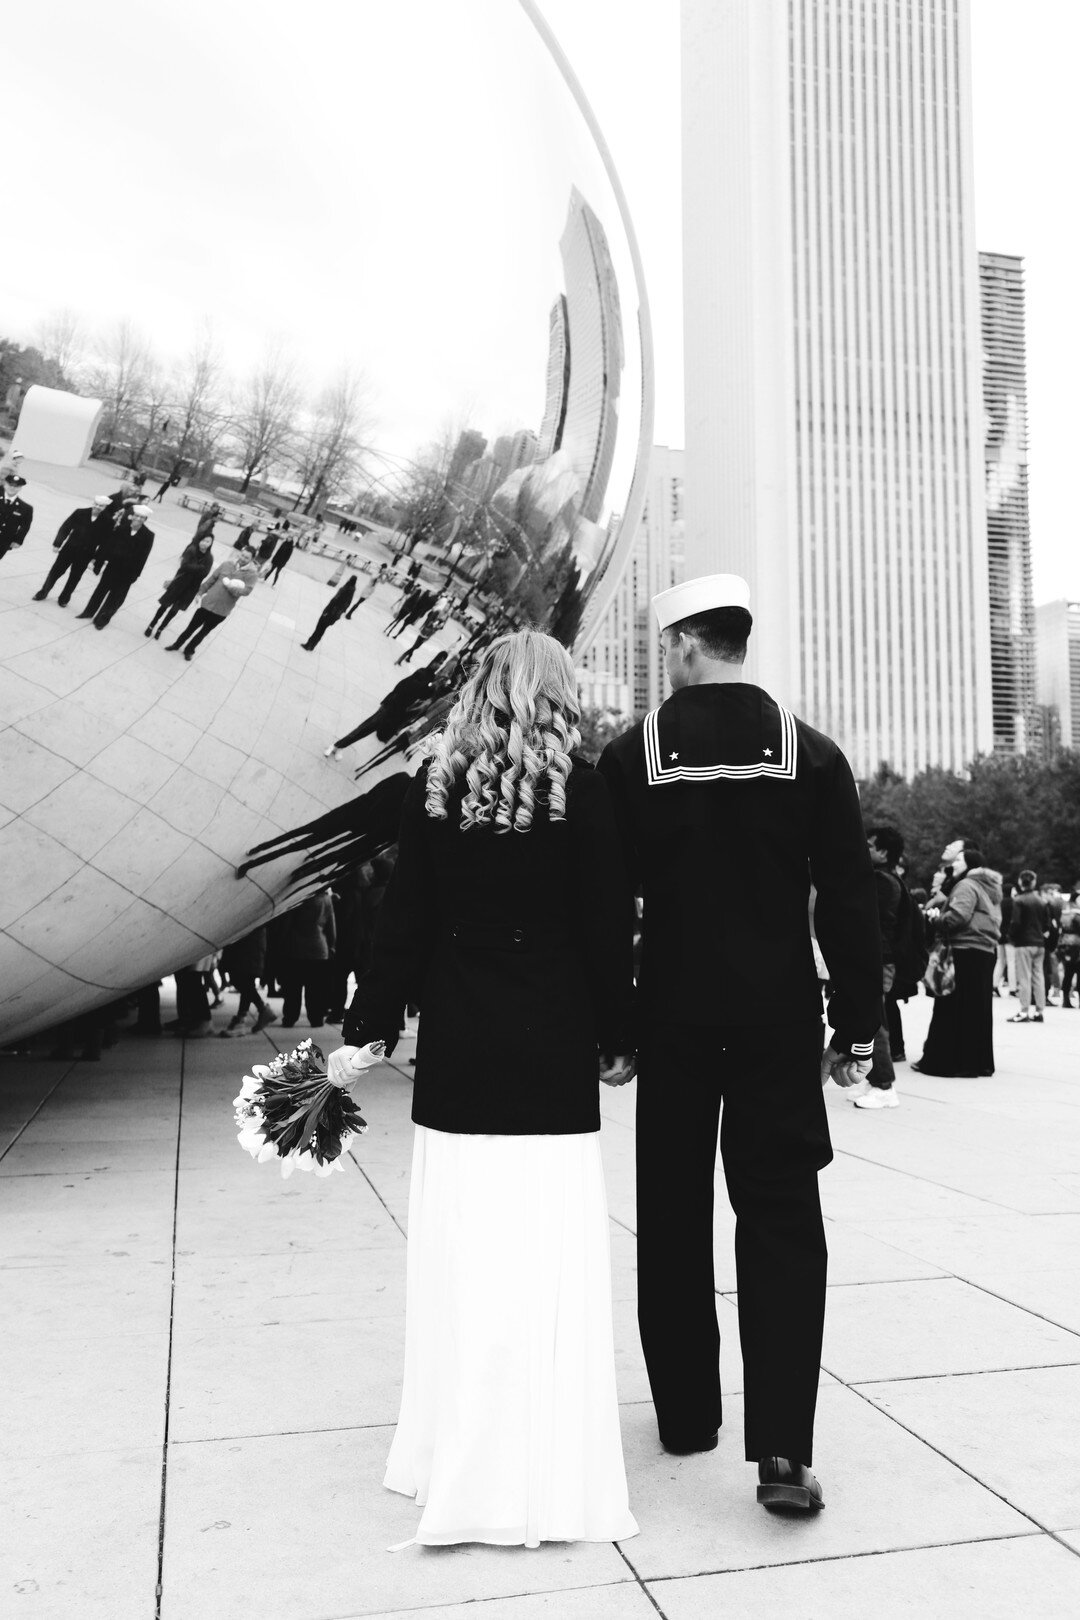 Small Wedding in the Big City captured by Ashley Griffin Photography featured on CHItheeWED.com!